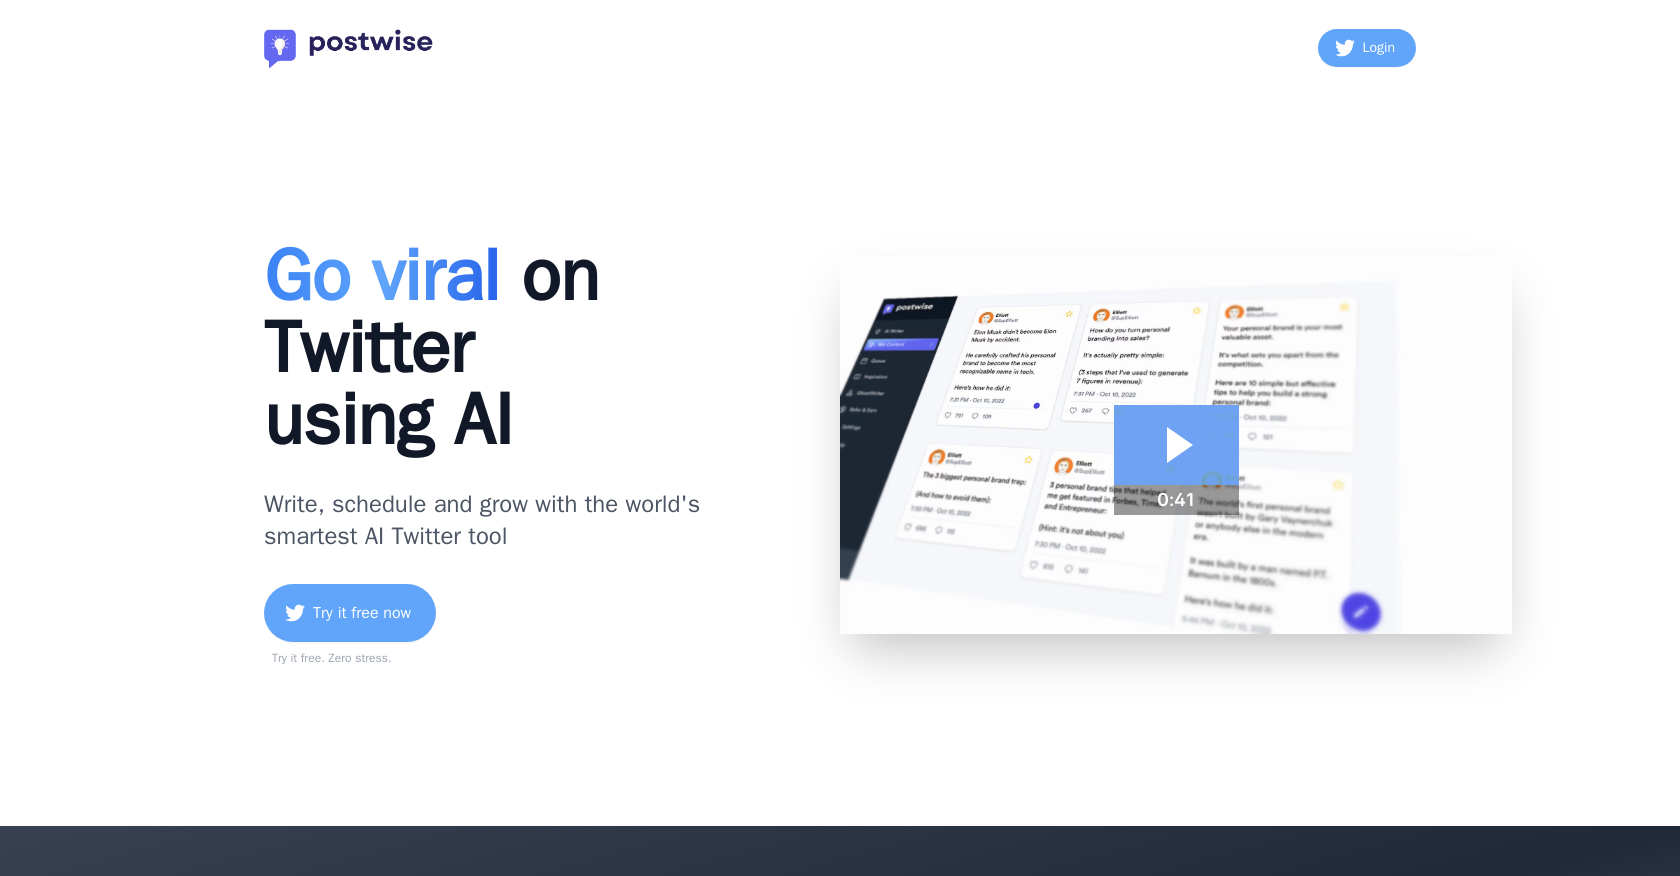 PostwiseUsing AI to create engaging content that spreads rapidly on